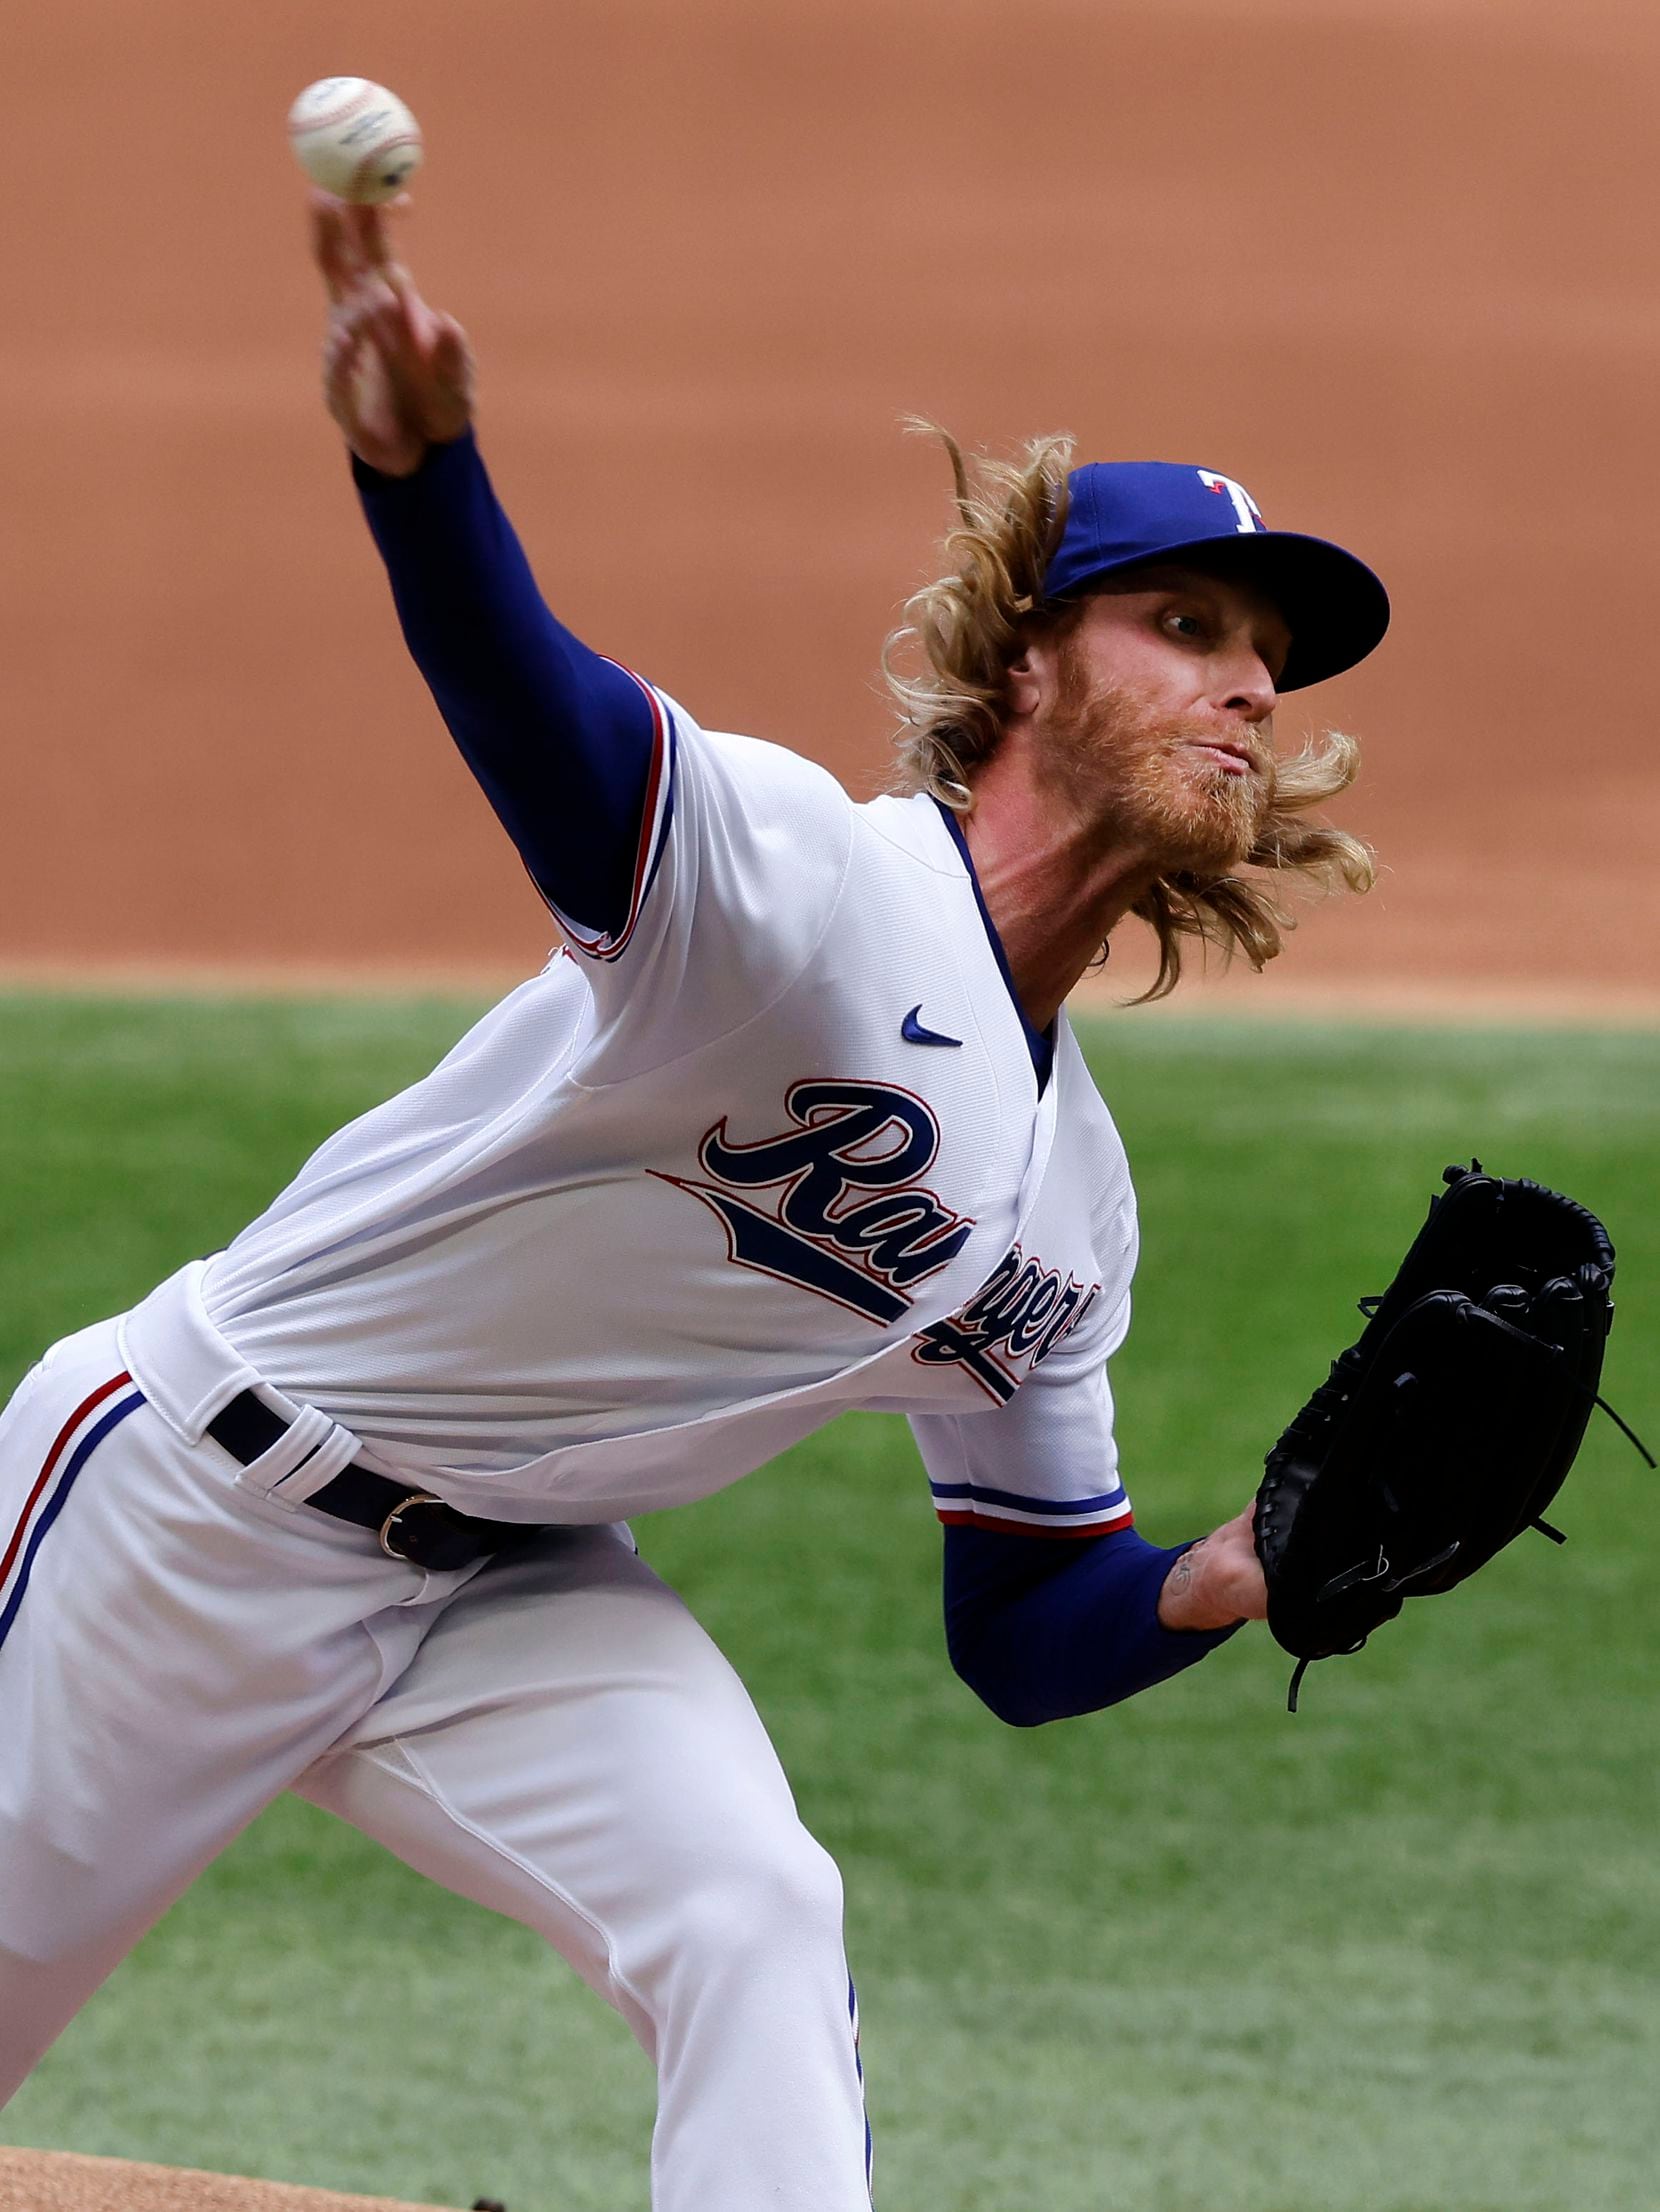 Texas Rangers starting pitcher Mike Foltynewicz (20) throws against the Toronto Blue Jays in the first inning at Globe Life Field in Arlington, Monday, April 5, 2021. The Texas Rangers were facing the Toronto Blue Jays in their home opener. (Tom Fox/The Dallas Morning News)